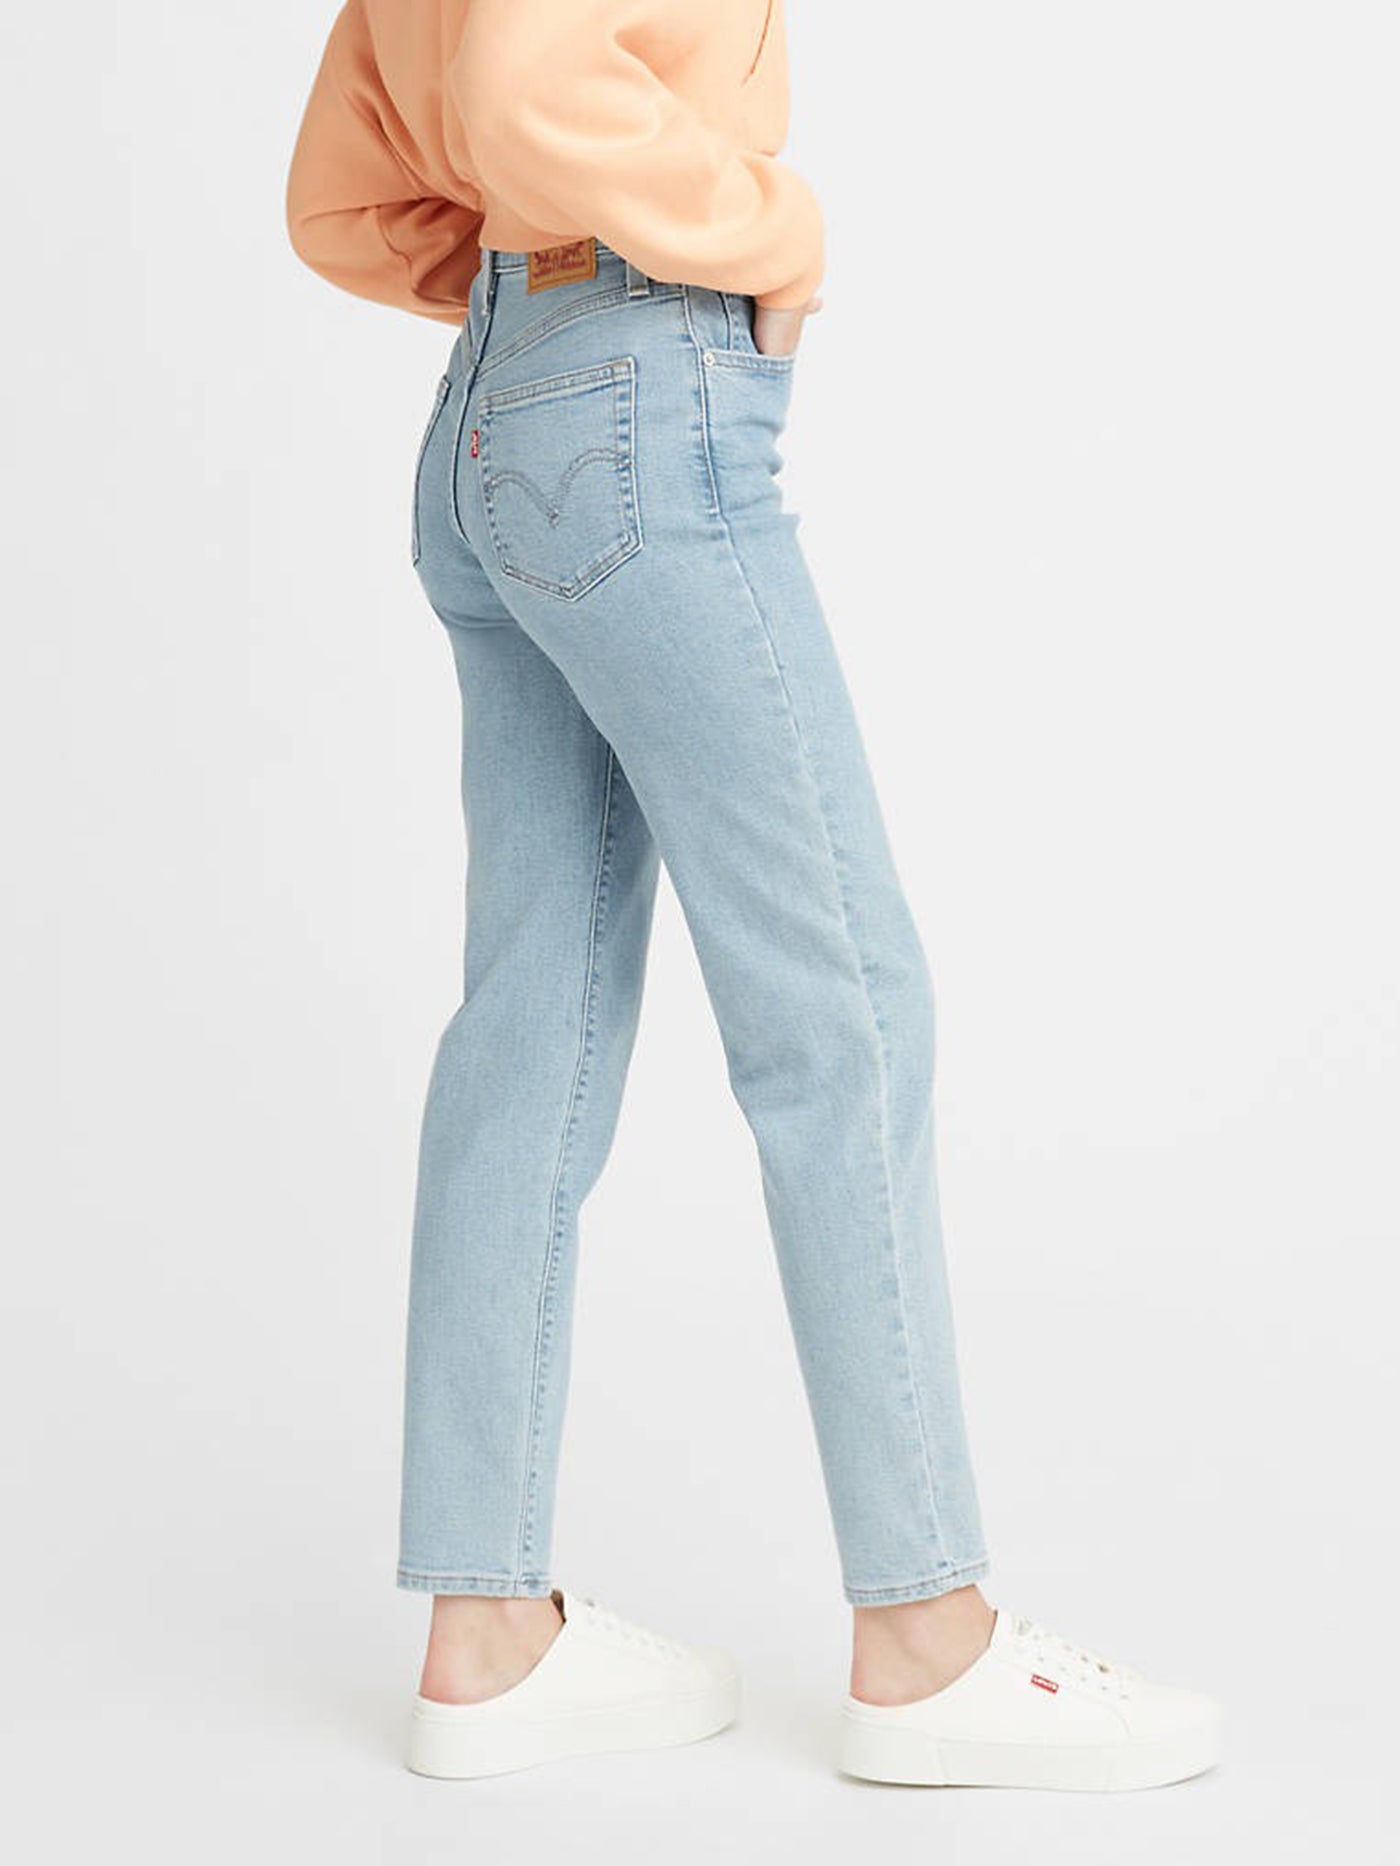 Levis High Waisted Mom Jeans | EMPIRE